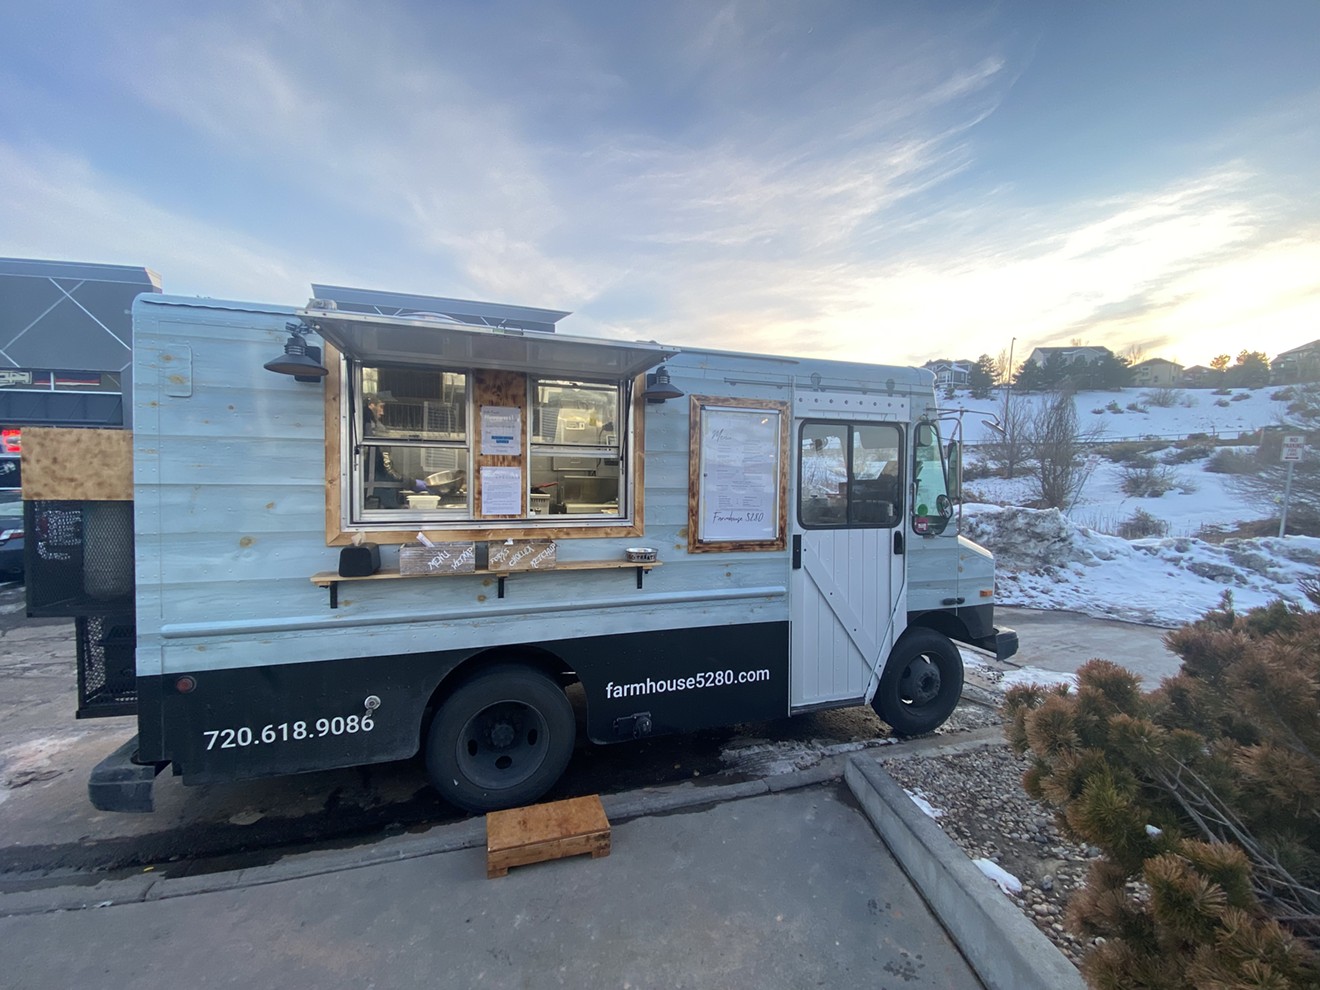 The Farmhouse5280 food truck is completely gluten-free.